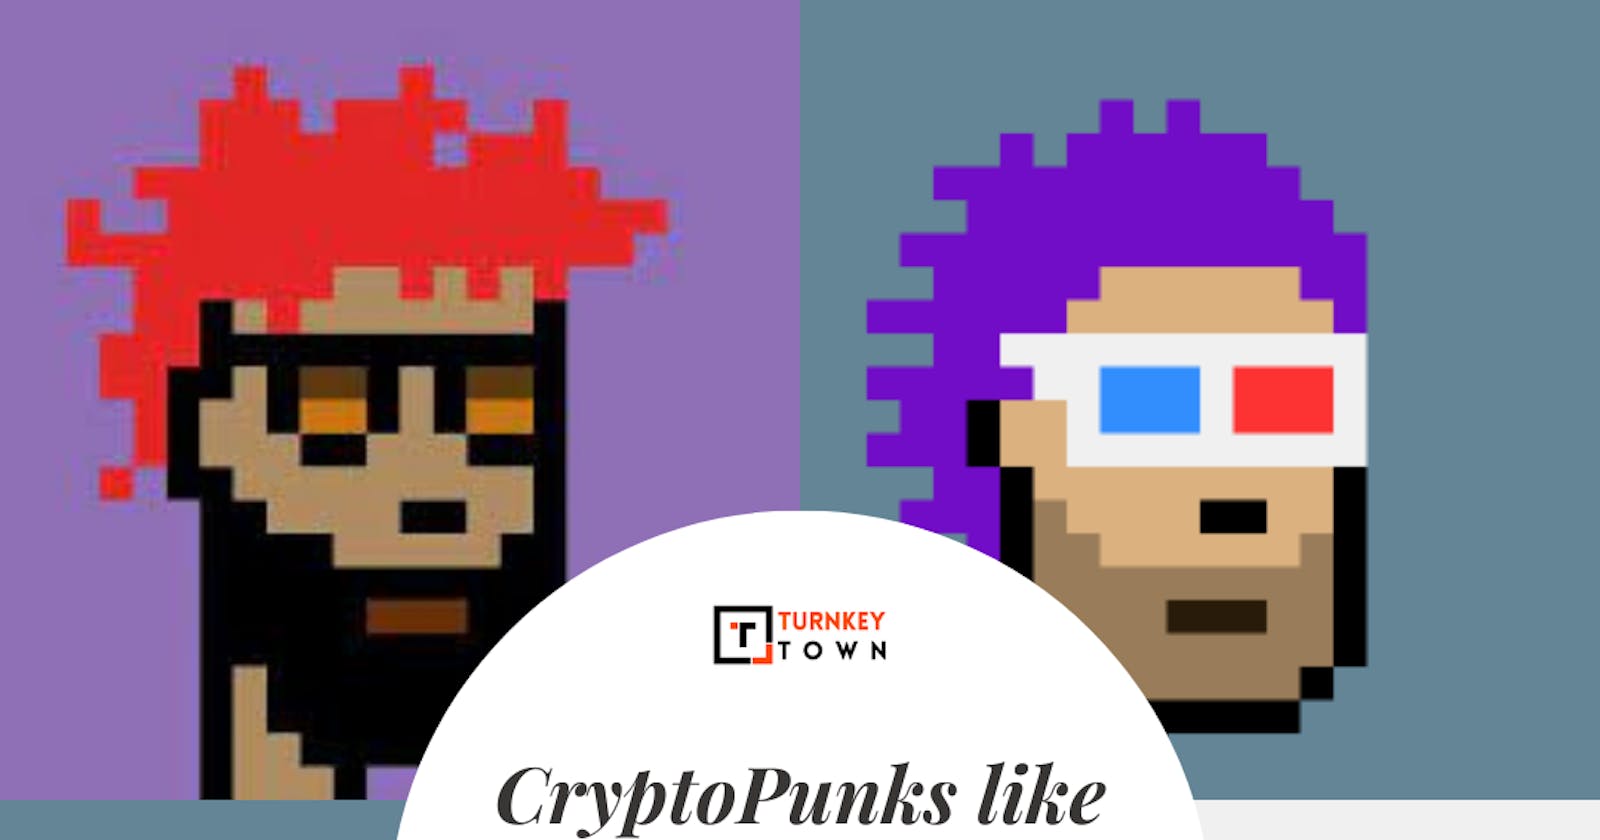 Get Insights On Creating A CryptoPunks Clone With Our Experts Now!